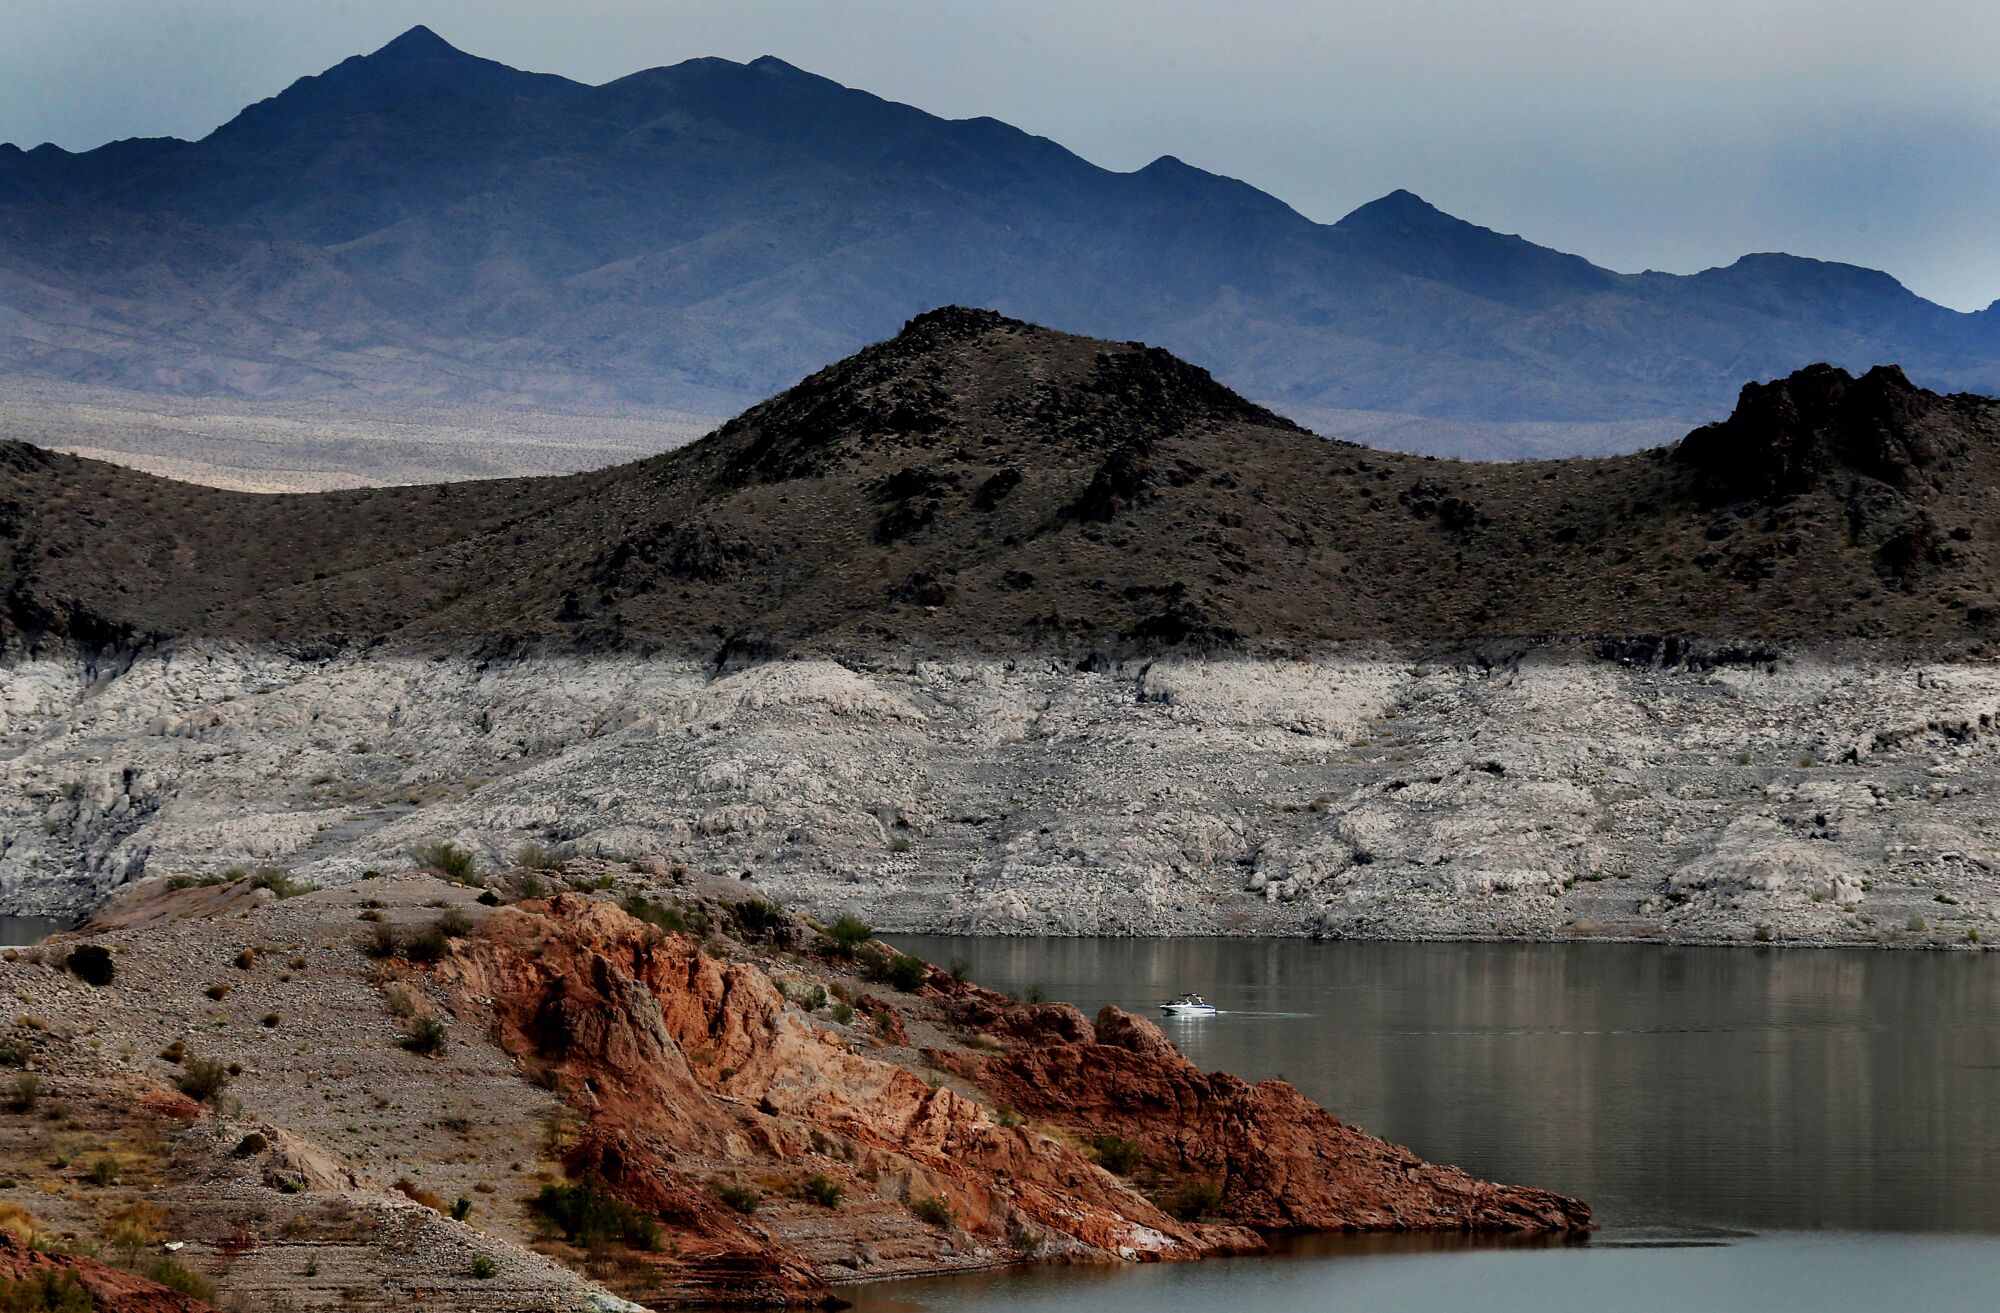 The so-called bathtub ring is evident on Lake Mead's mountainous shore